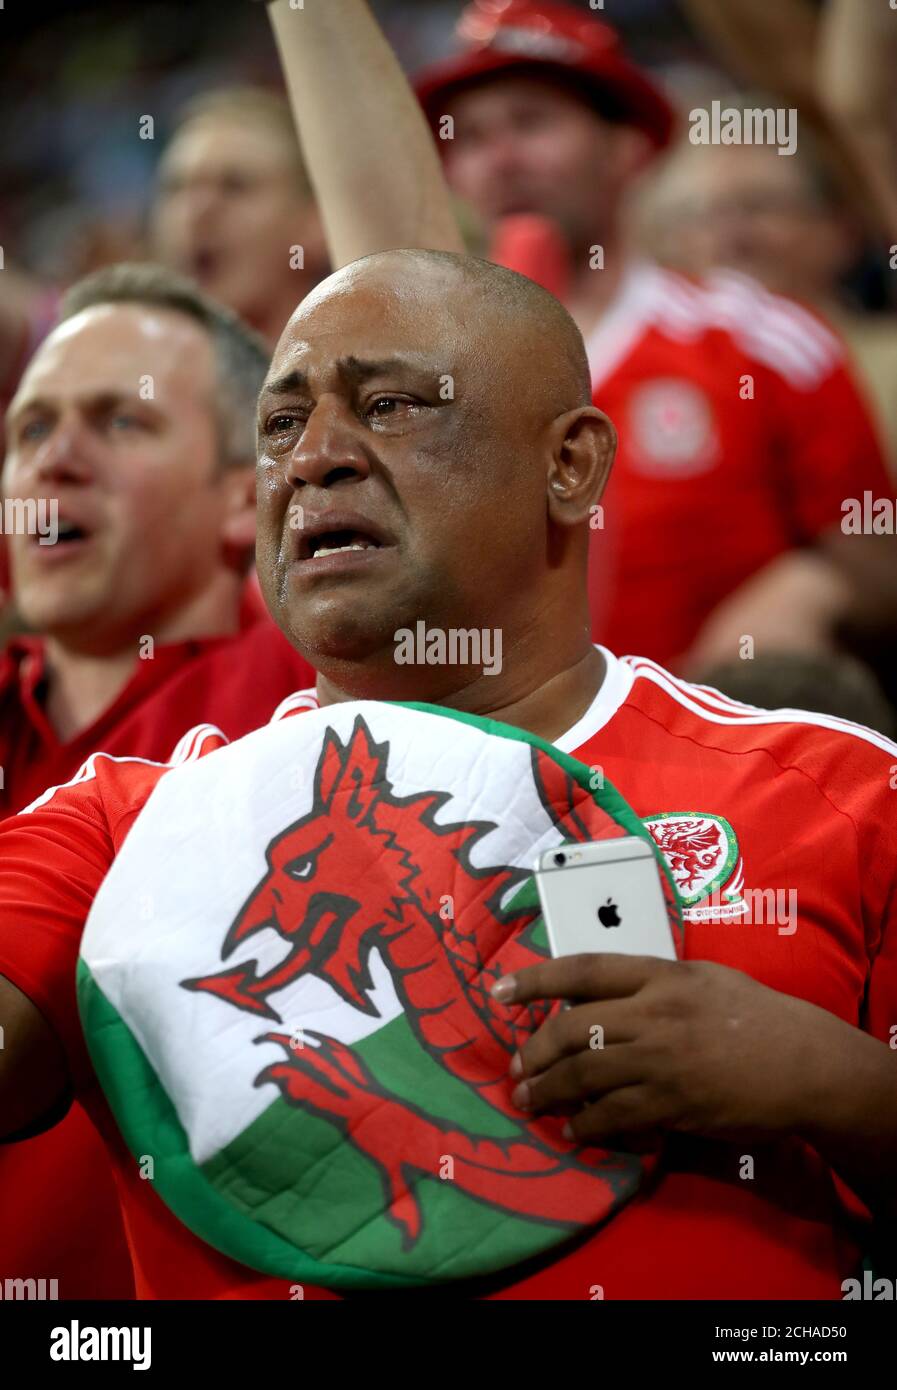 A Wales fan shows his emotion in the stands after the UEFA Euro 2016, semi-final match at the Stade de Lyon, Lyon. Stock Photo